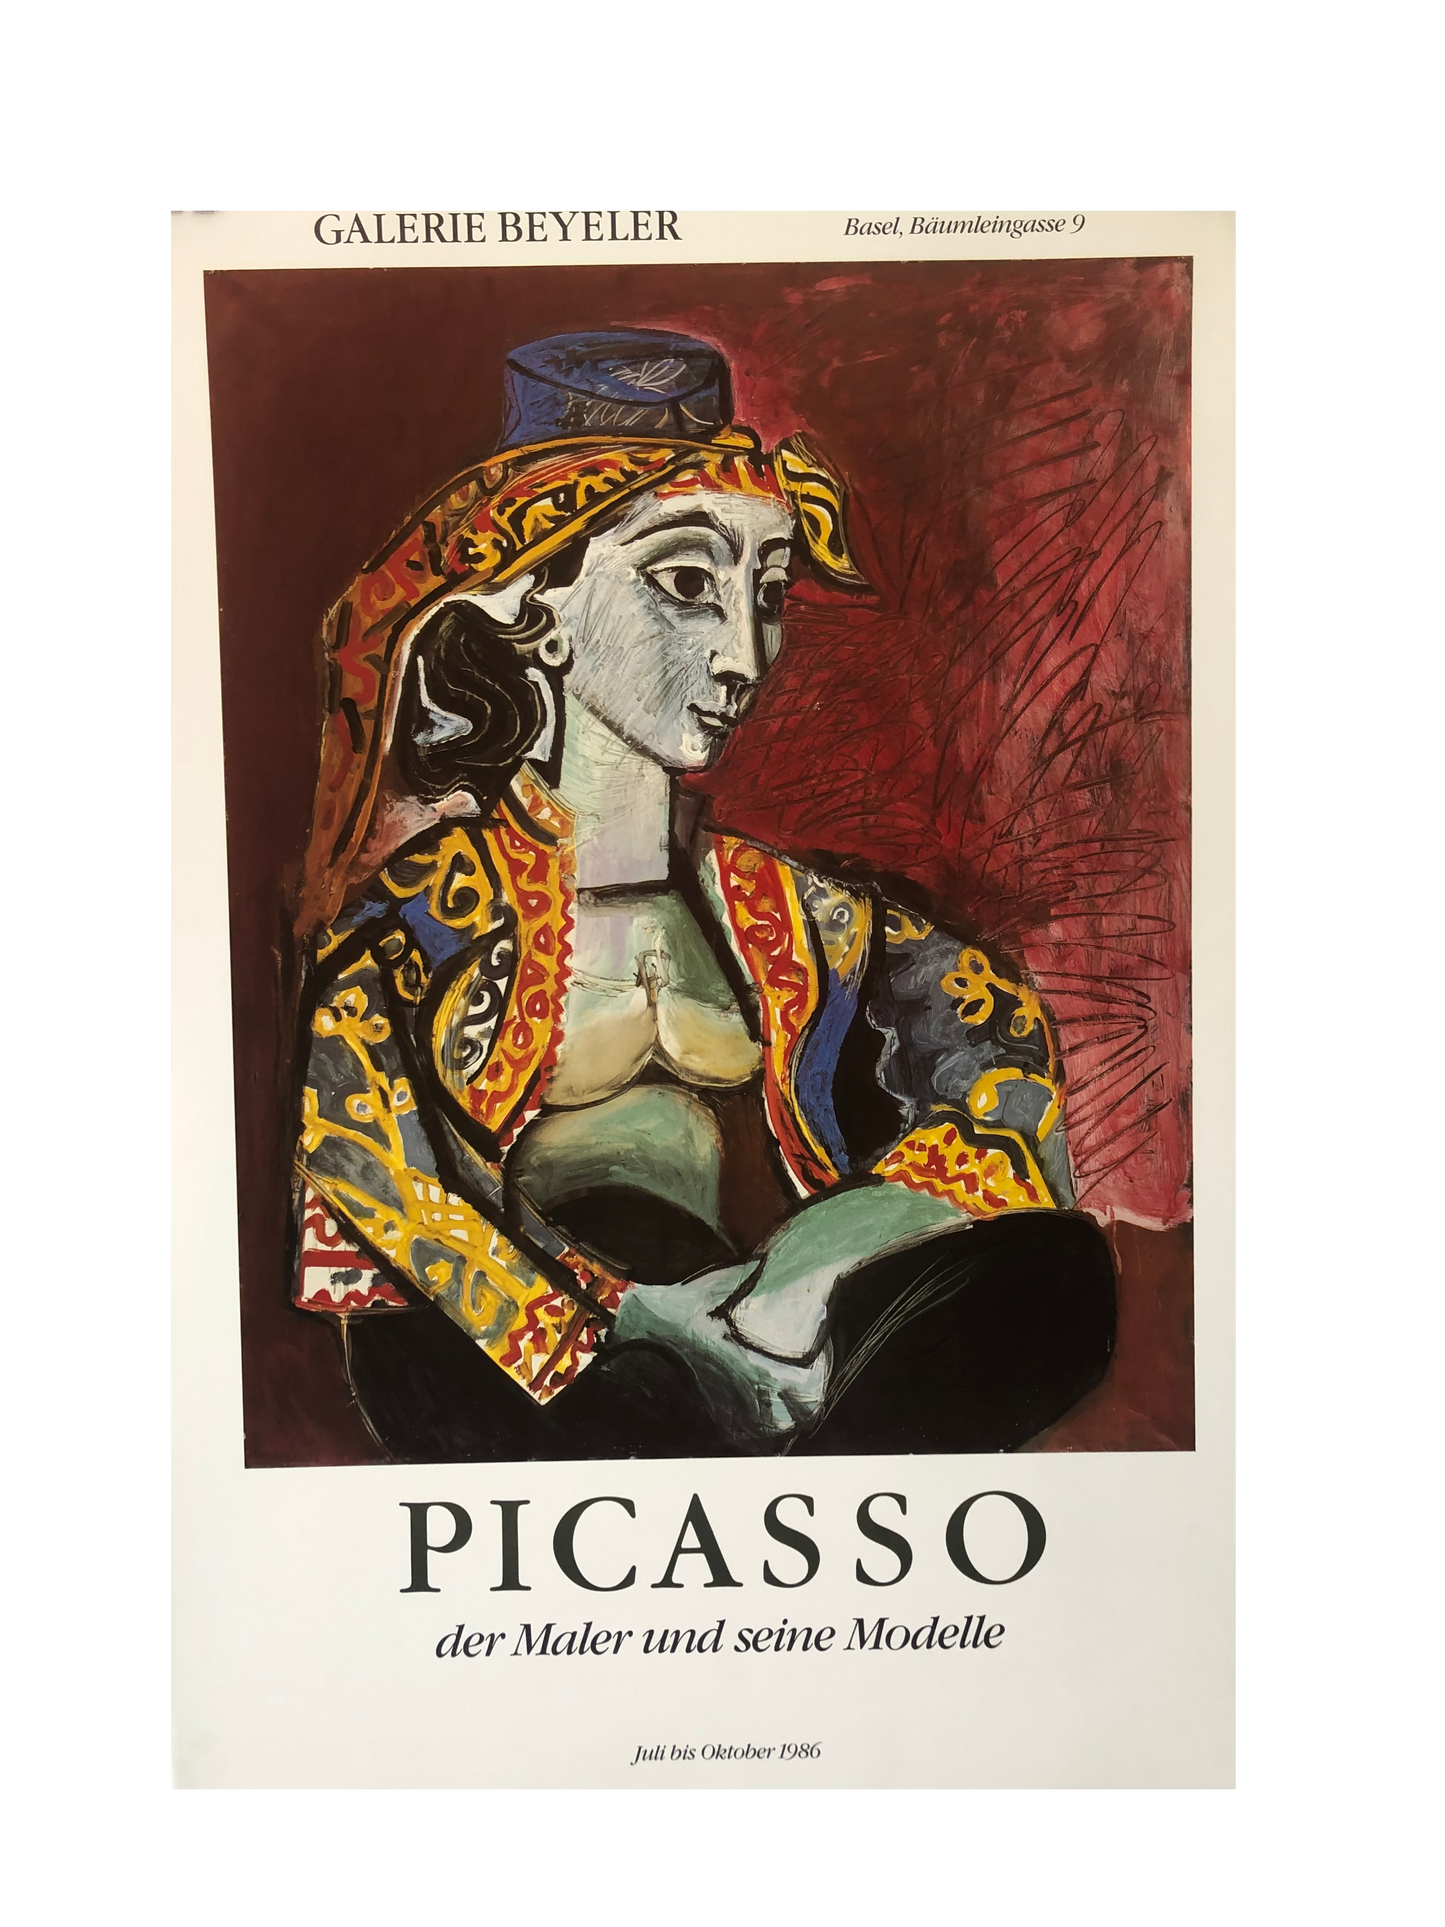 Picasso Exhibition Poster, Galerie Beyeler 1986